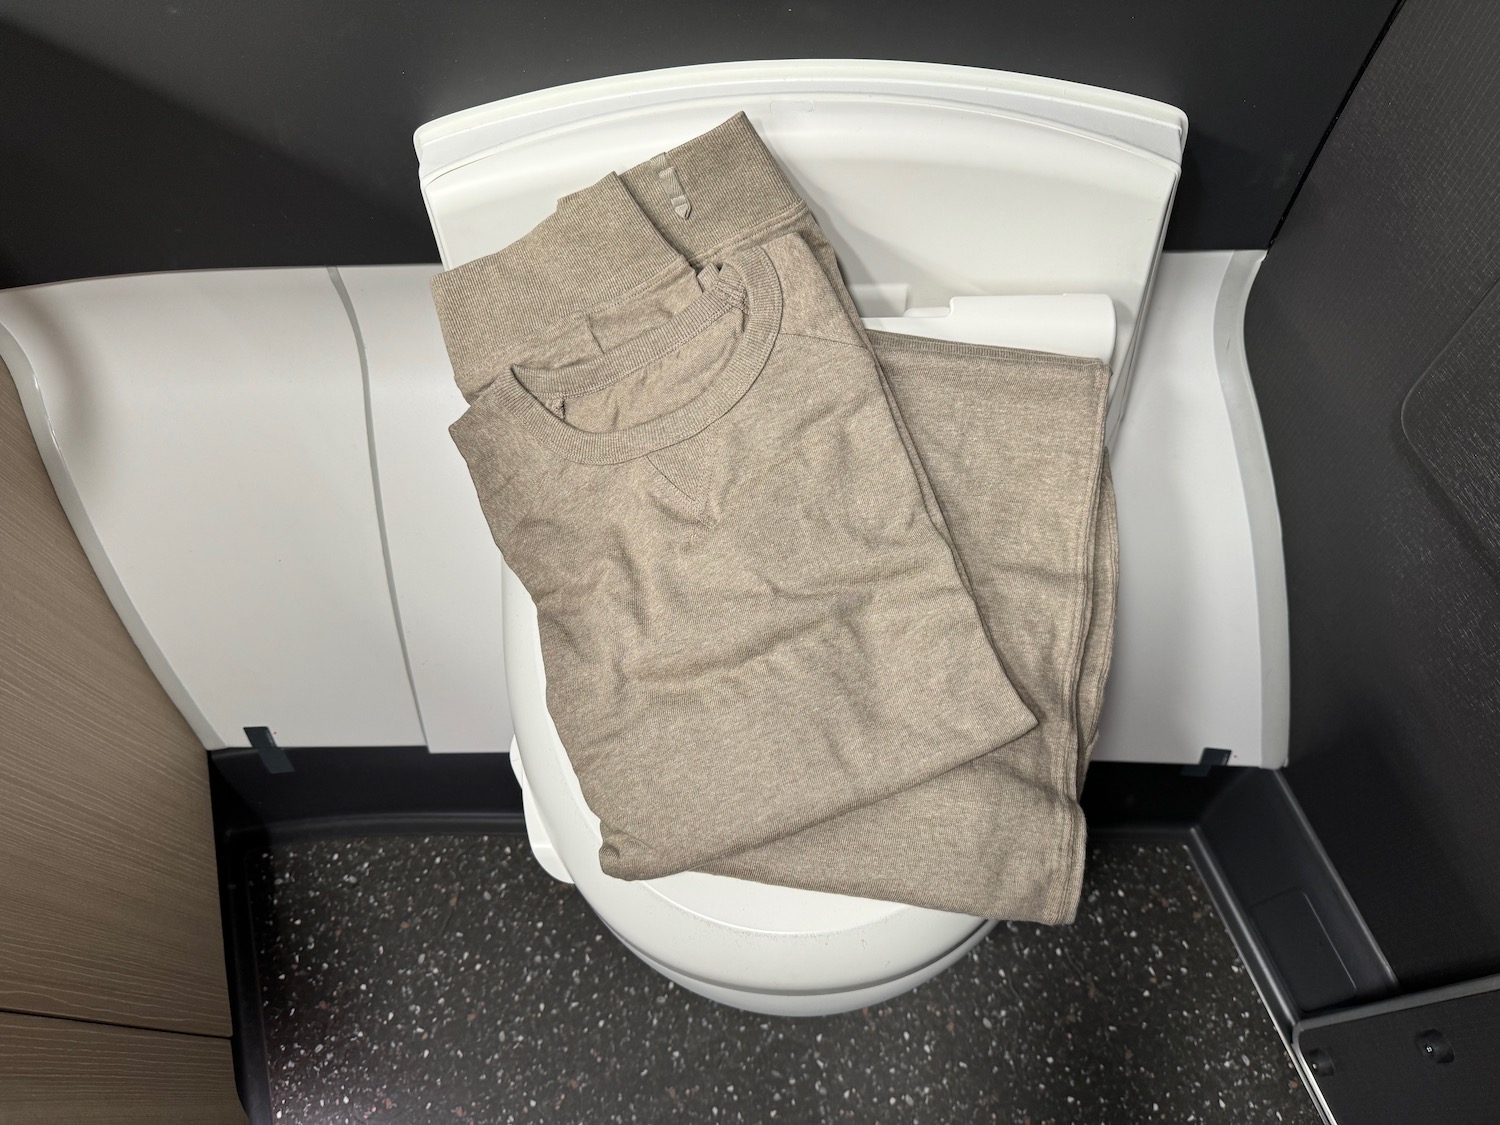 a folded clothes on a toilet